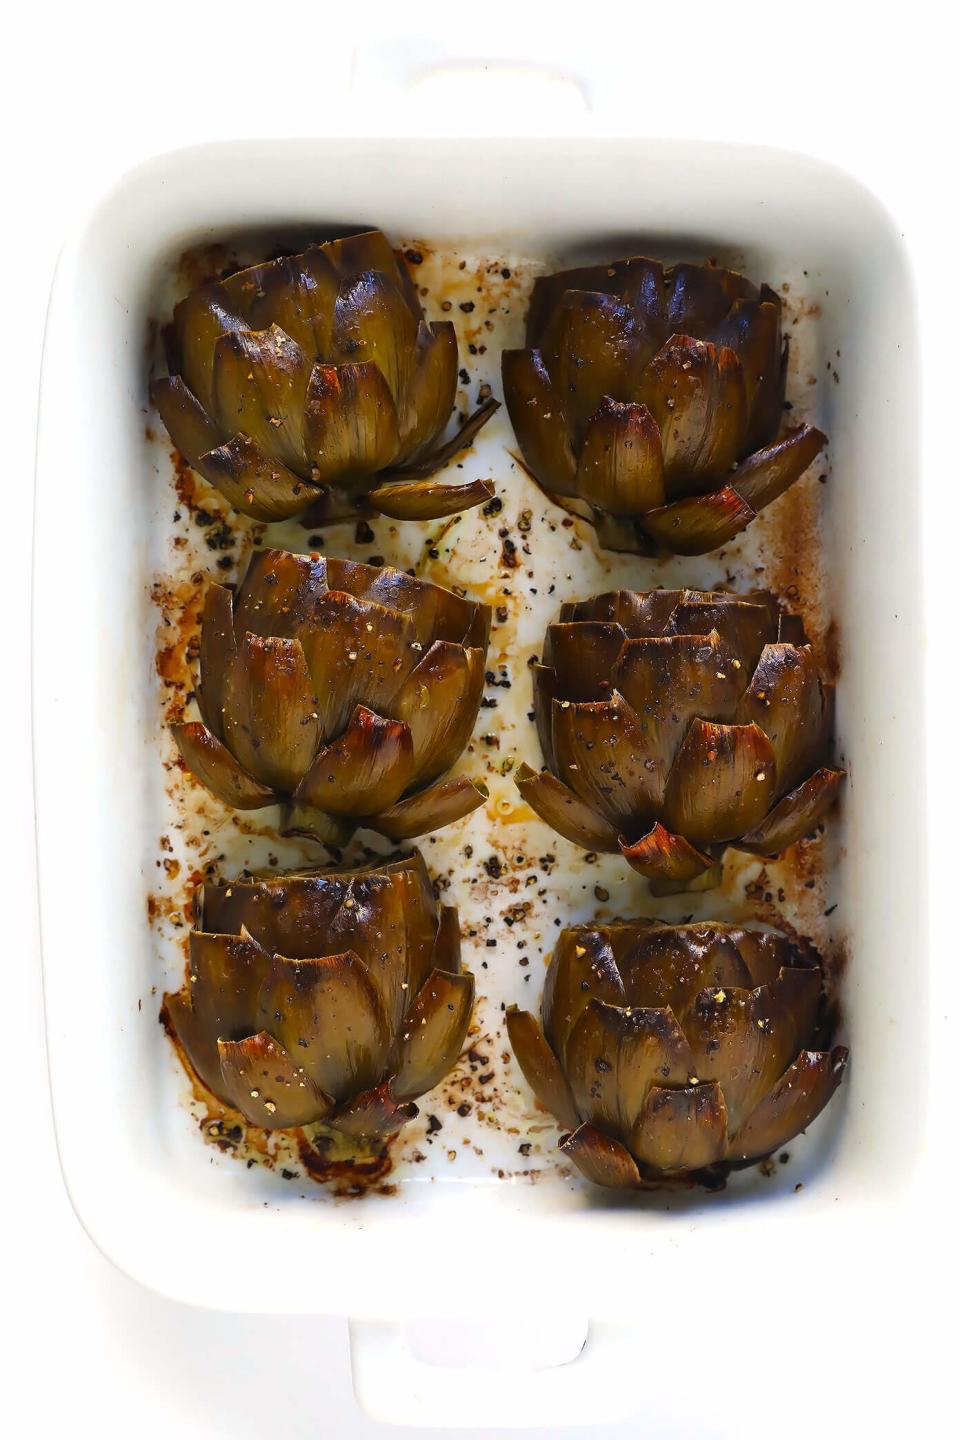 Four roasted artichokes in a white baking dish